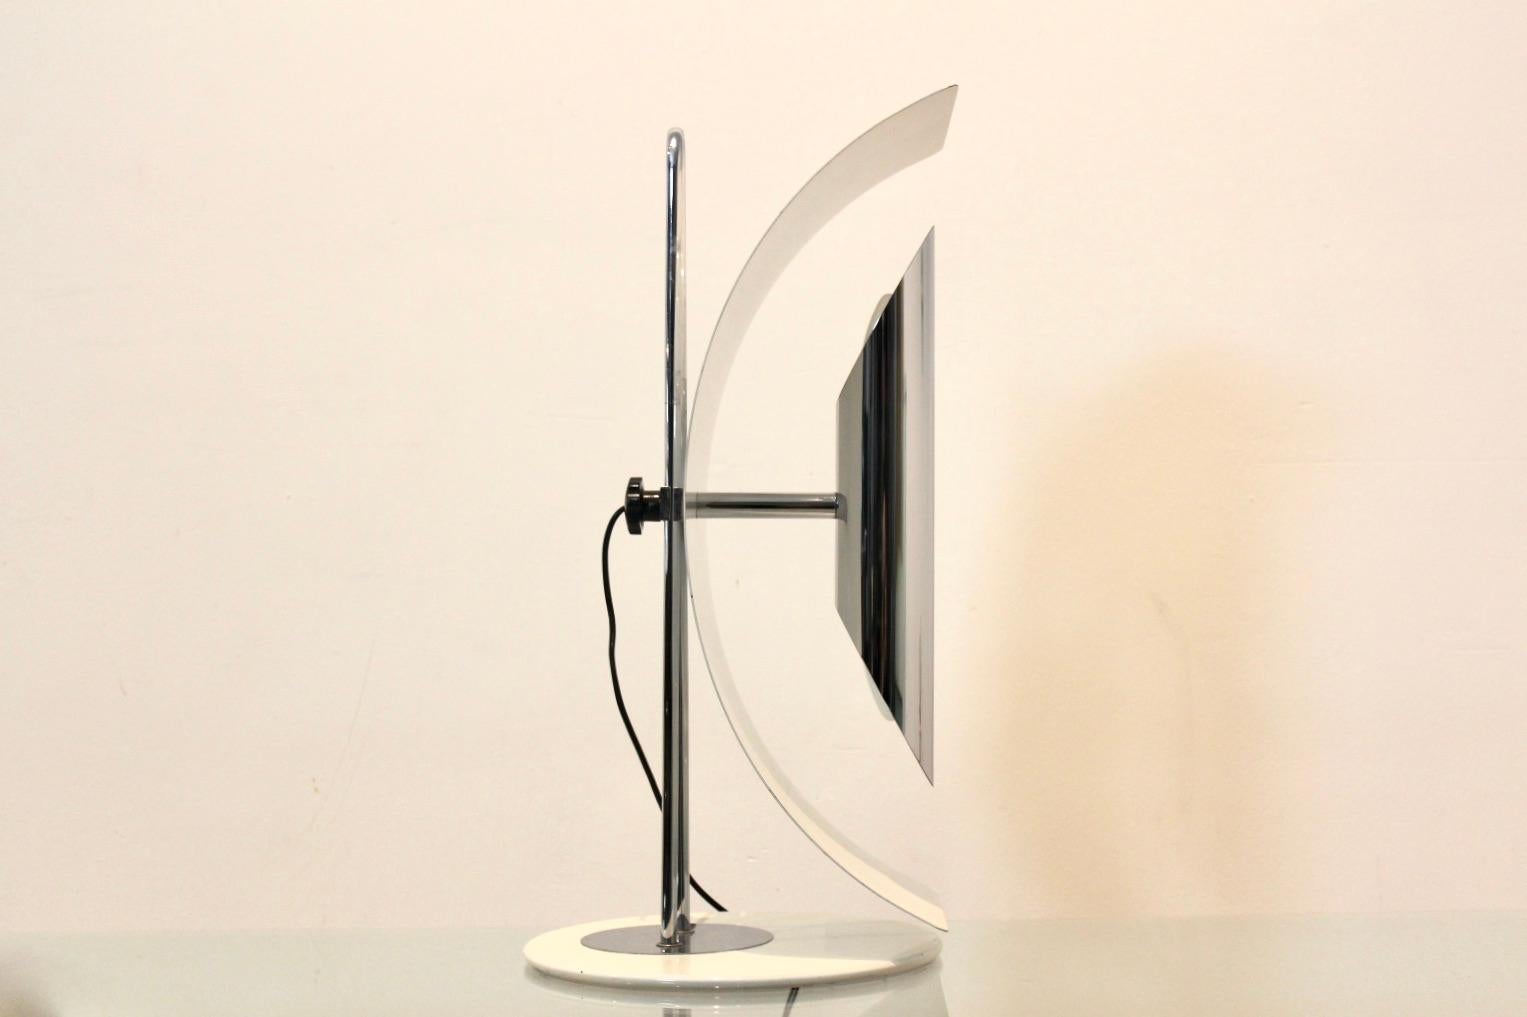 Iconic Goffredo Reggiani Italian table lamp made by Studio Reggiani, Italy, 1960s. White and chrome base with a moon shaped shade and chrome holder for two-light bulbs. Very sophisticated and beautiful light. The shade is horizontally and vertically